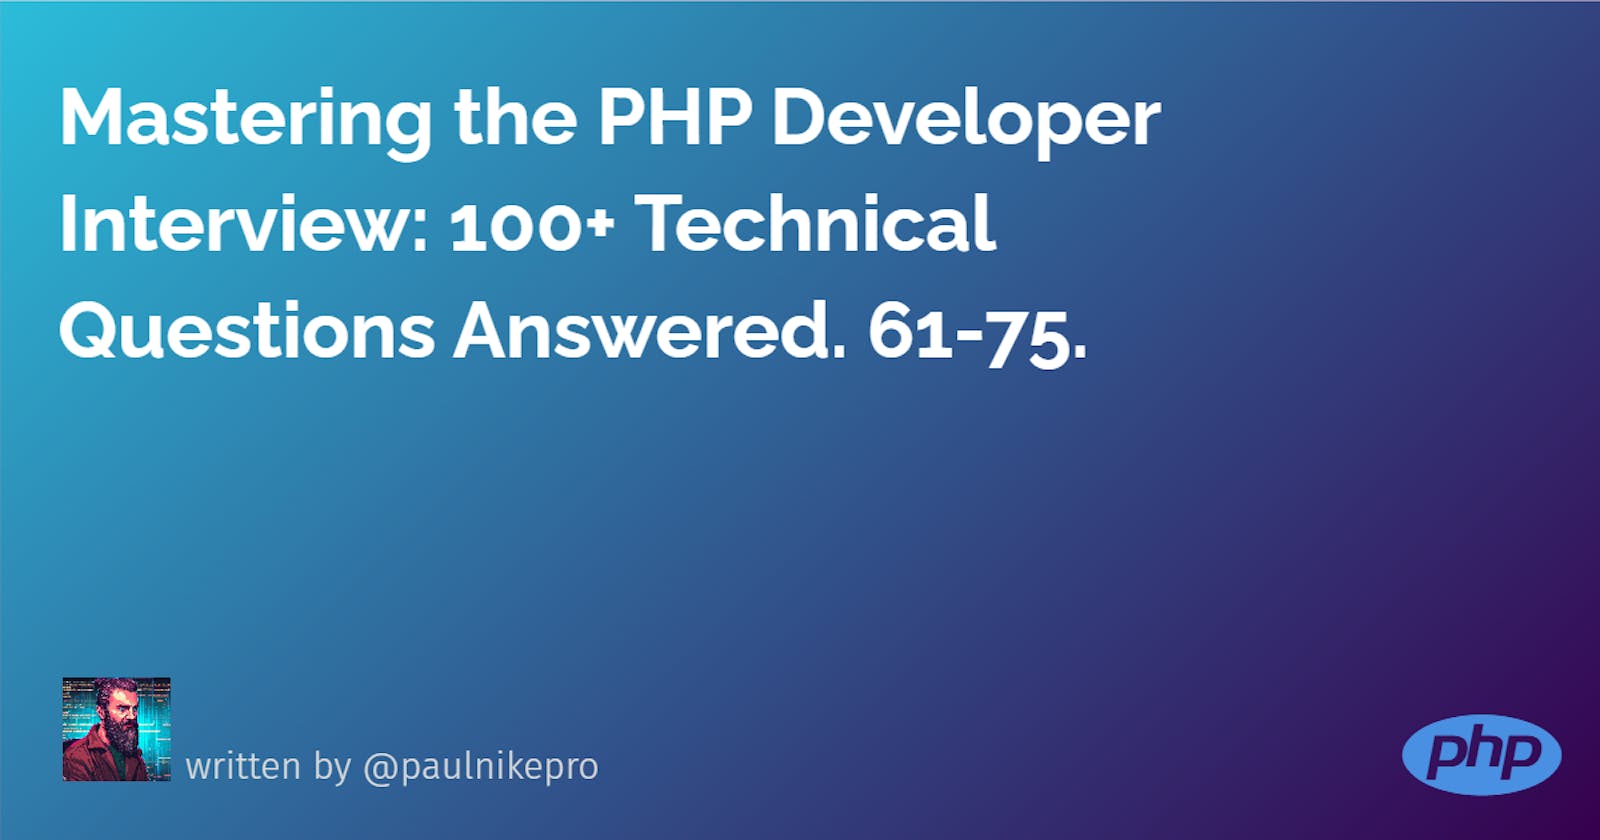 Mastering the PHP Developer Interview: 100+ Technical Questions Answered. 61-75.